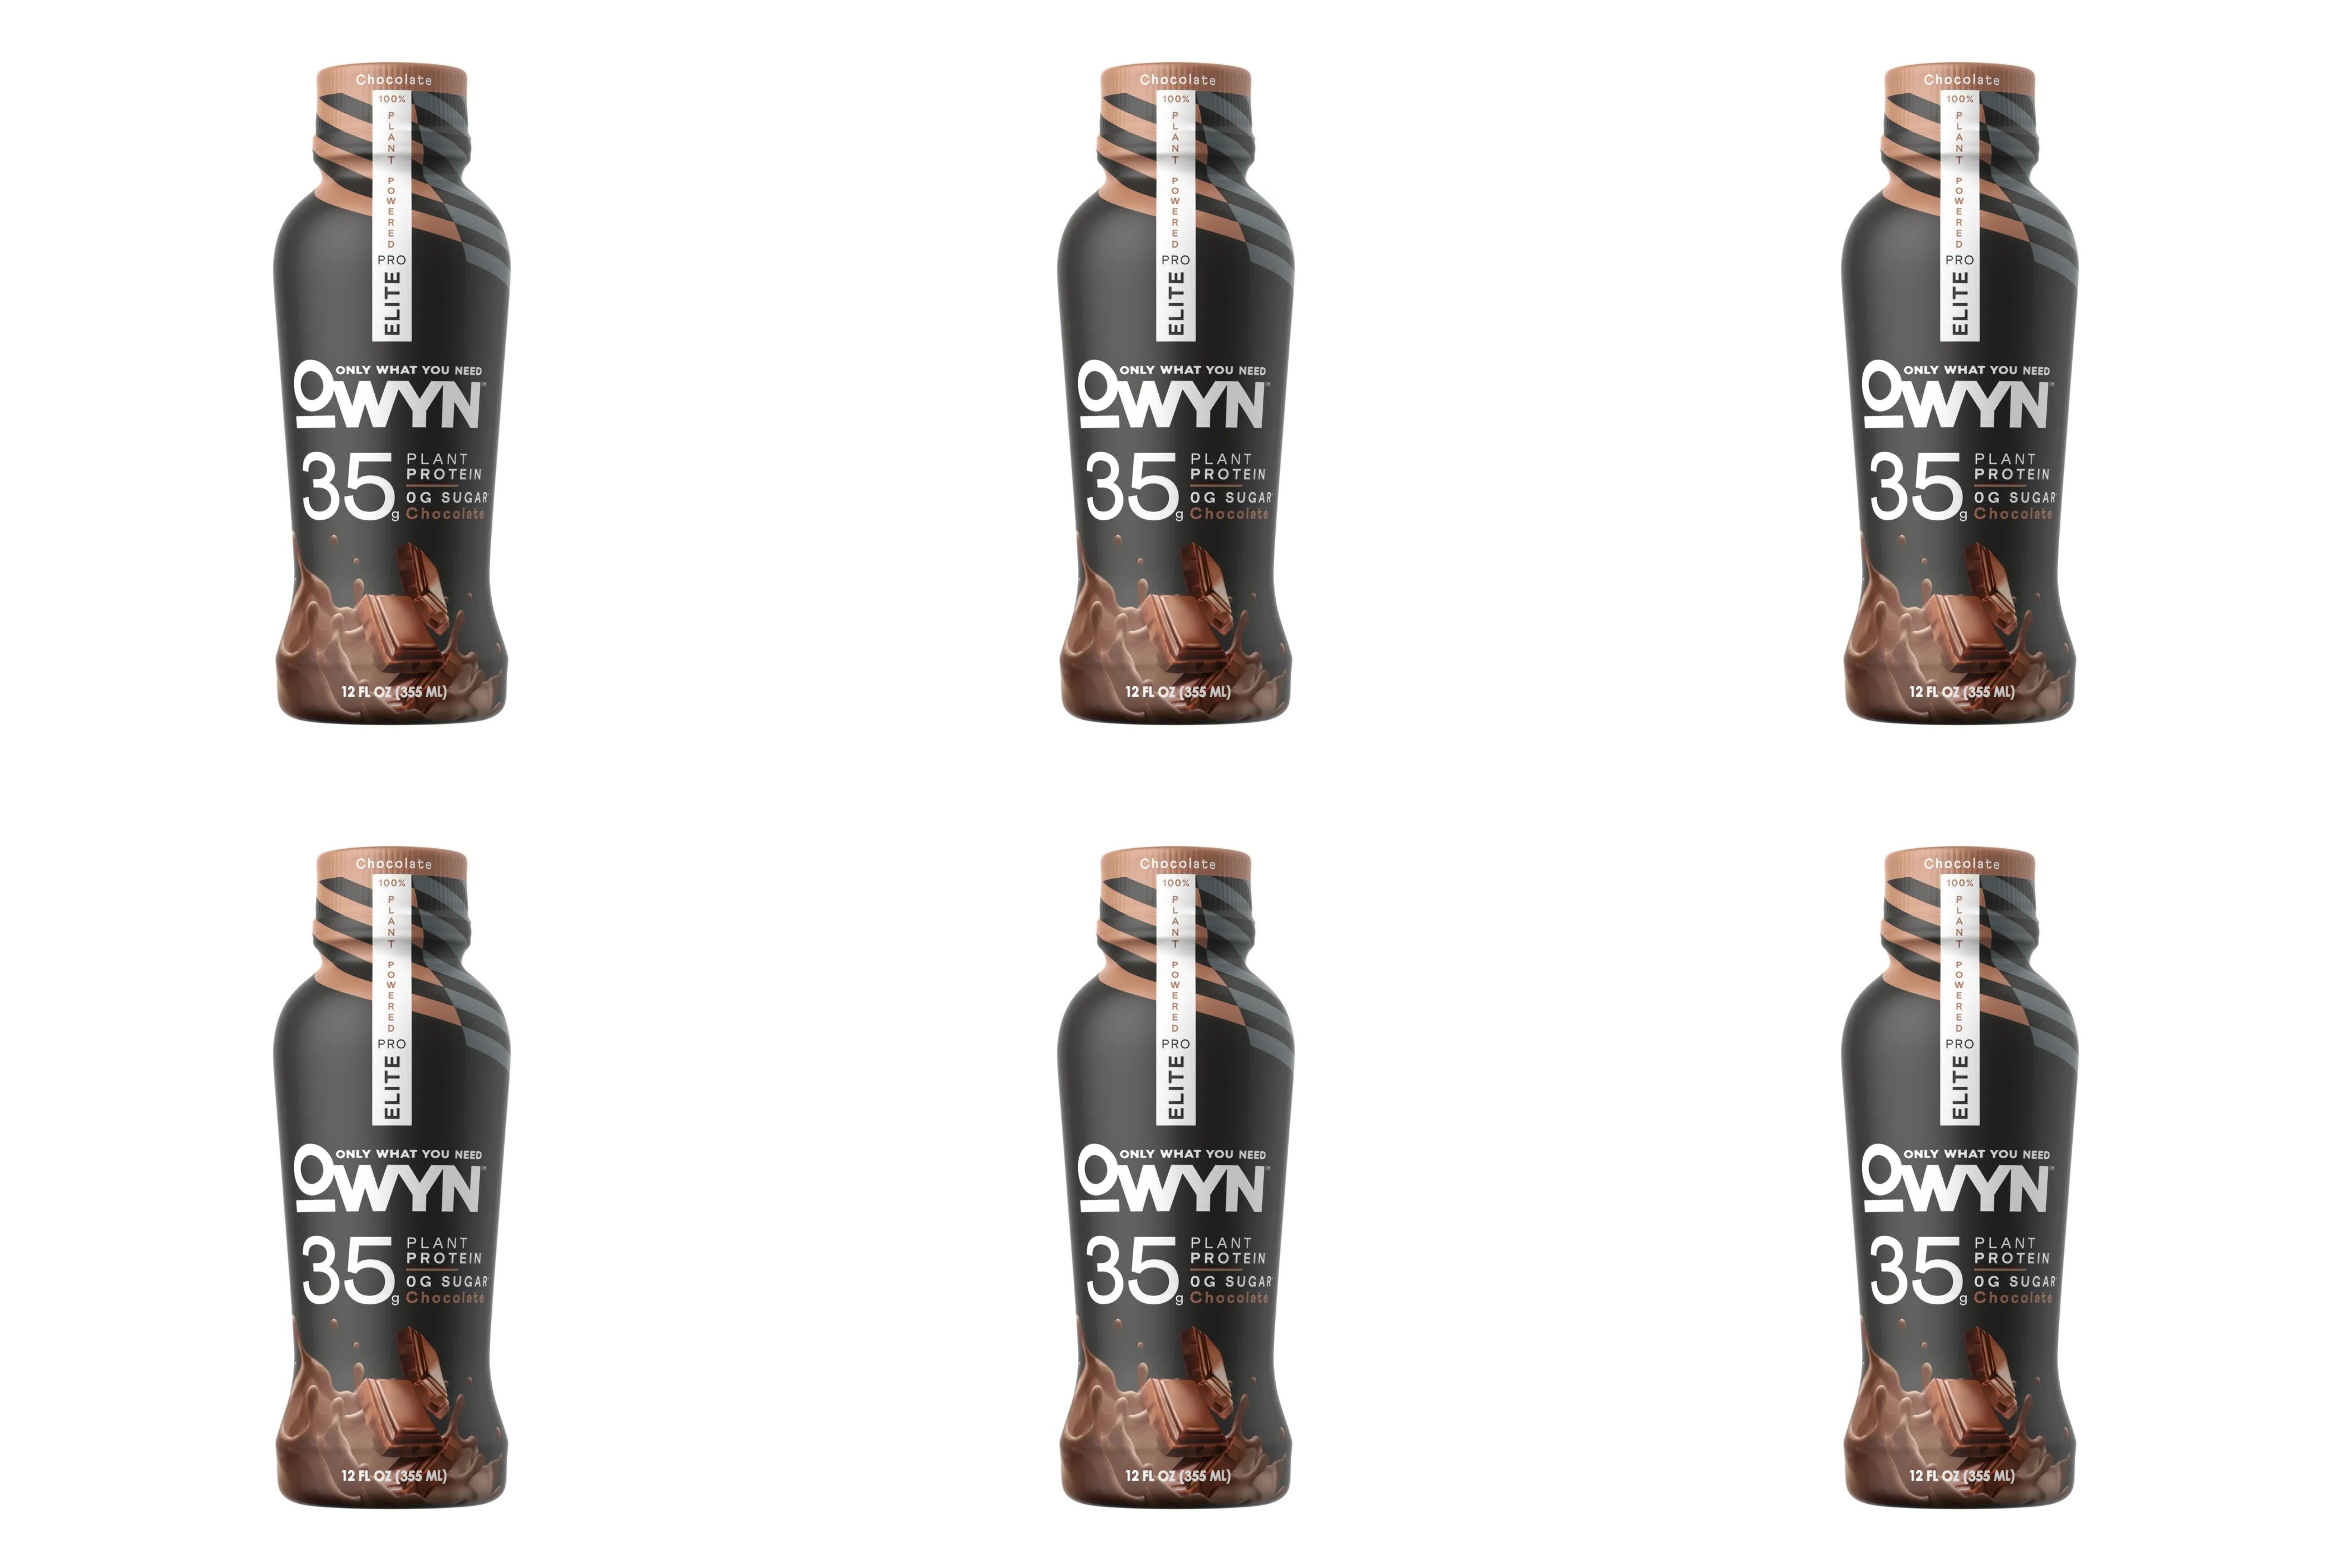 #Flavor_Chocolate #Size_6-Pack